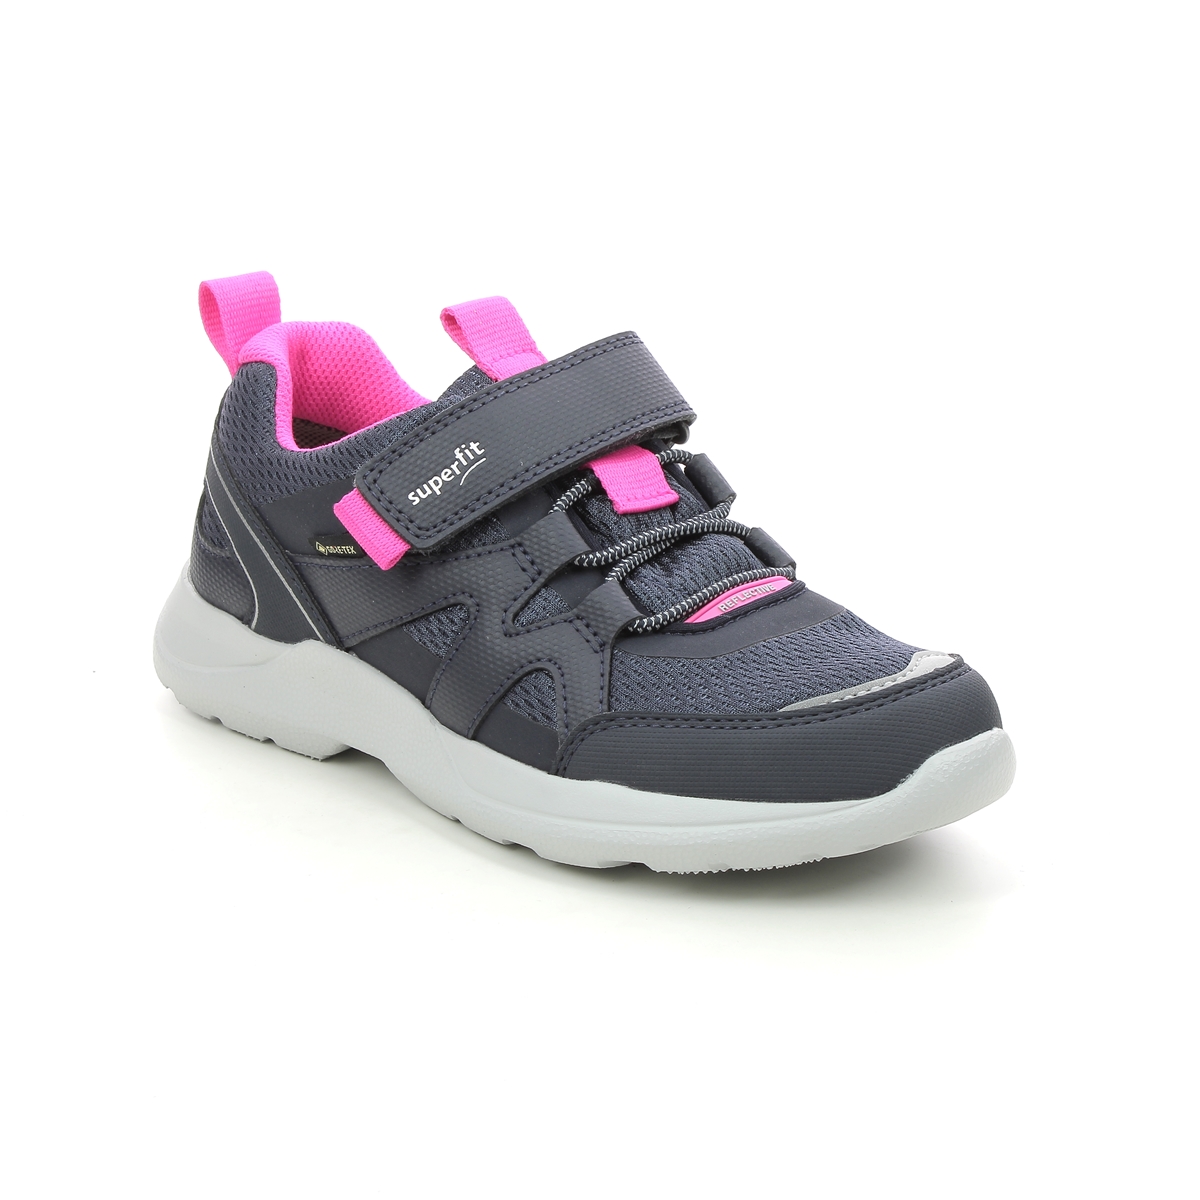 Superfit Rush Jnr G Gtx Navy Pink Kids Girls Trainers 1006219-8020 In Size 37 In Plain Navy Pink For kids